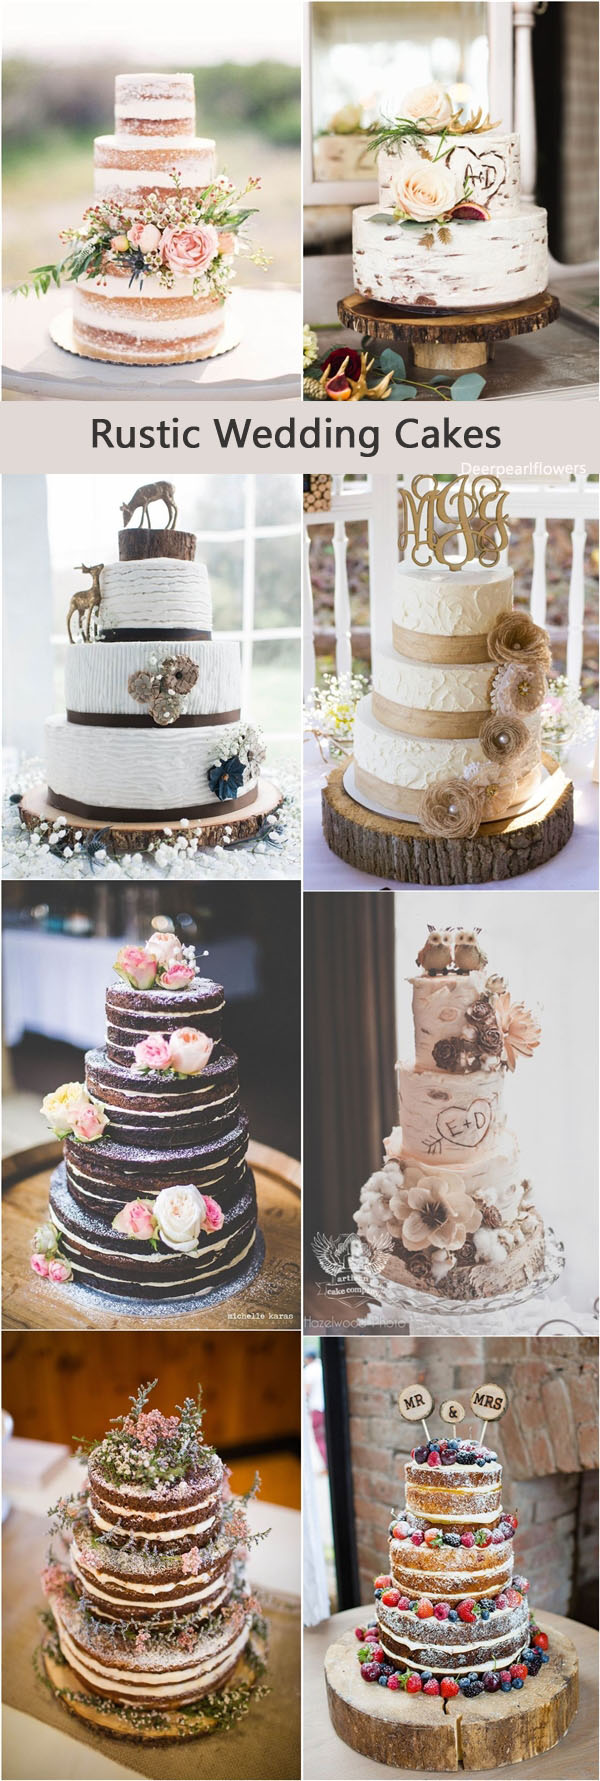 Rustic country wedding cakes